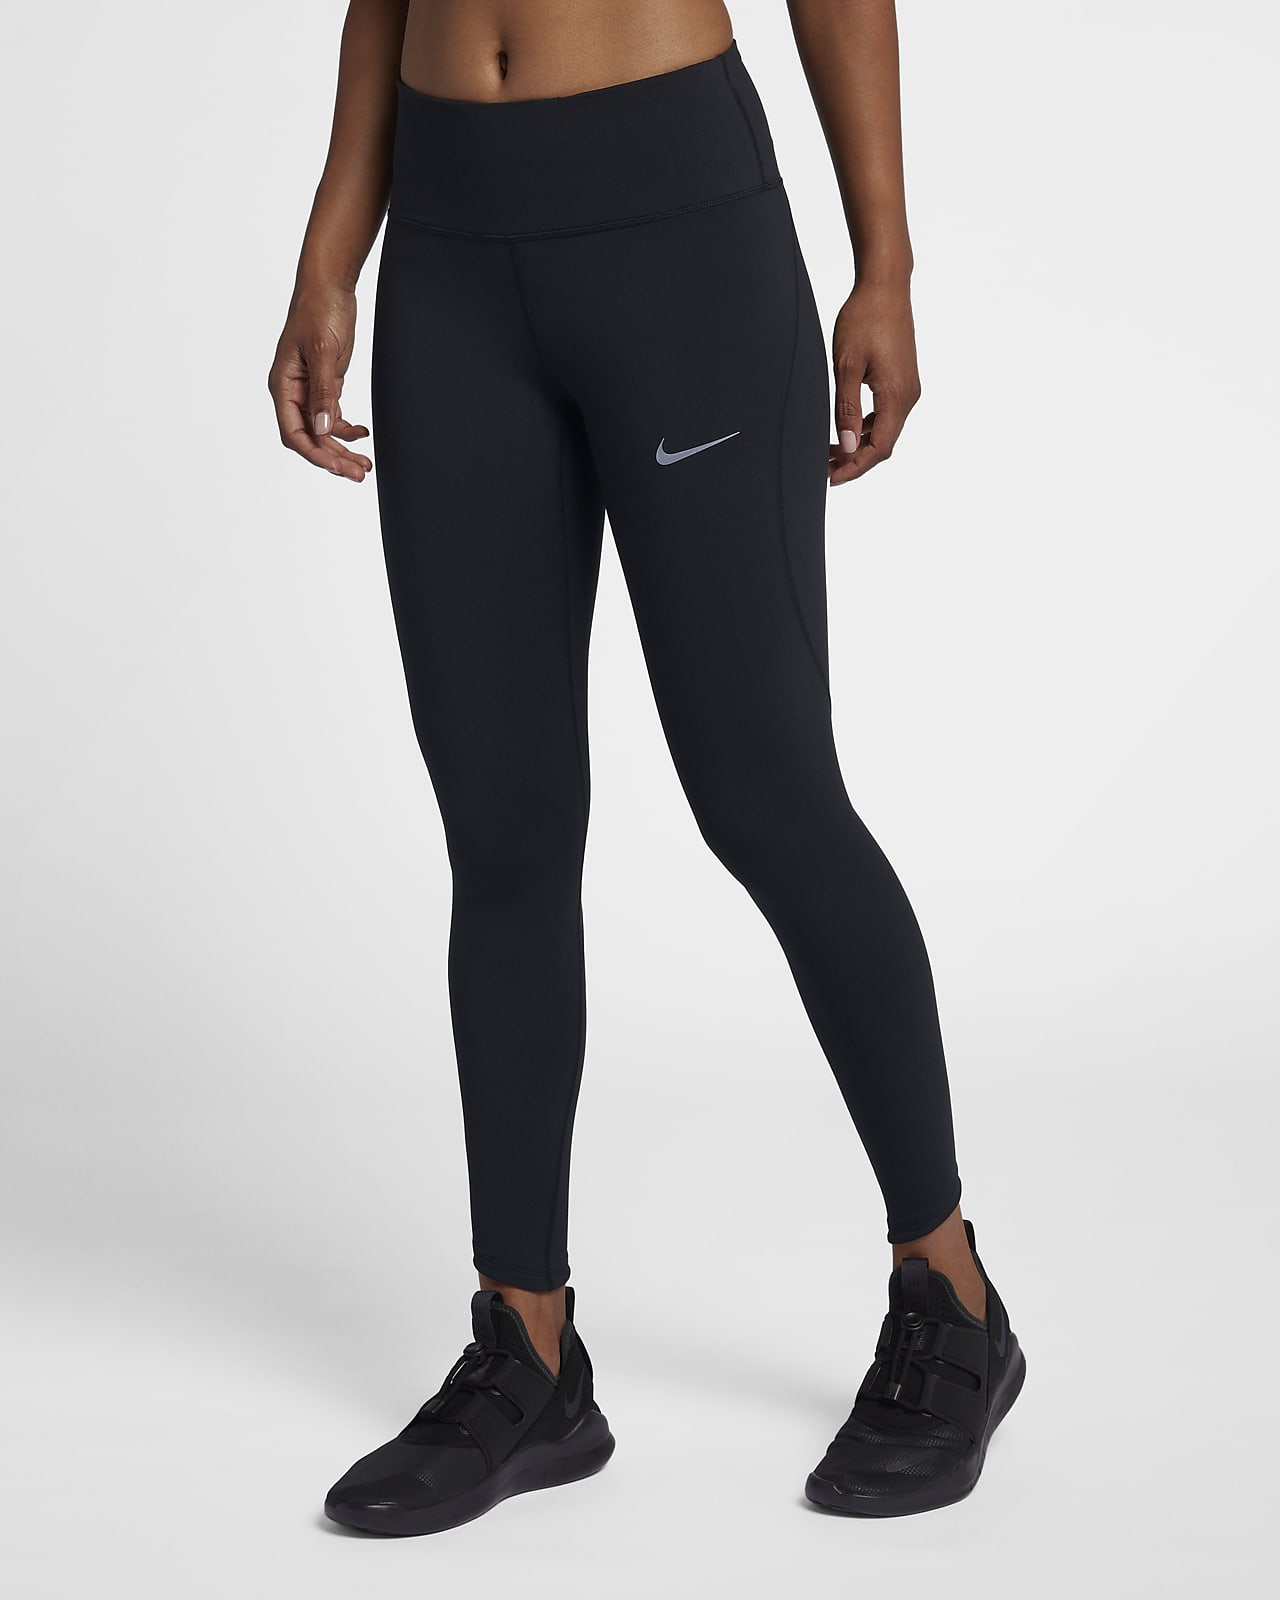 Nike Epic Lux Women's High-Waisted 7/8 